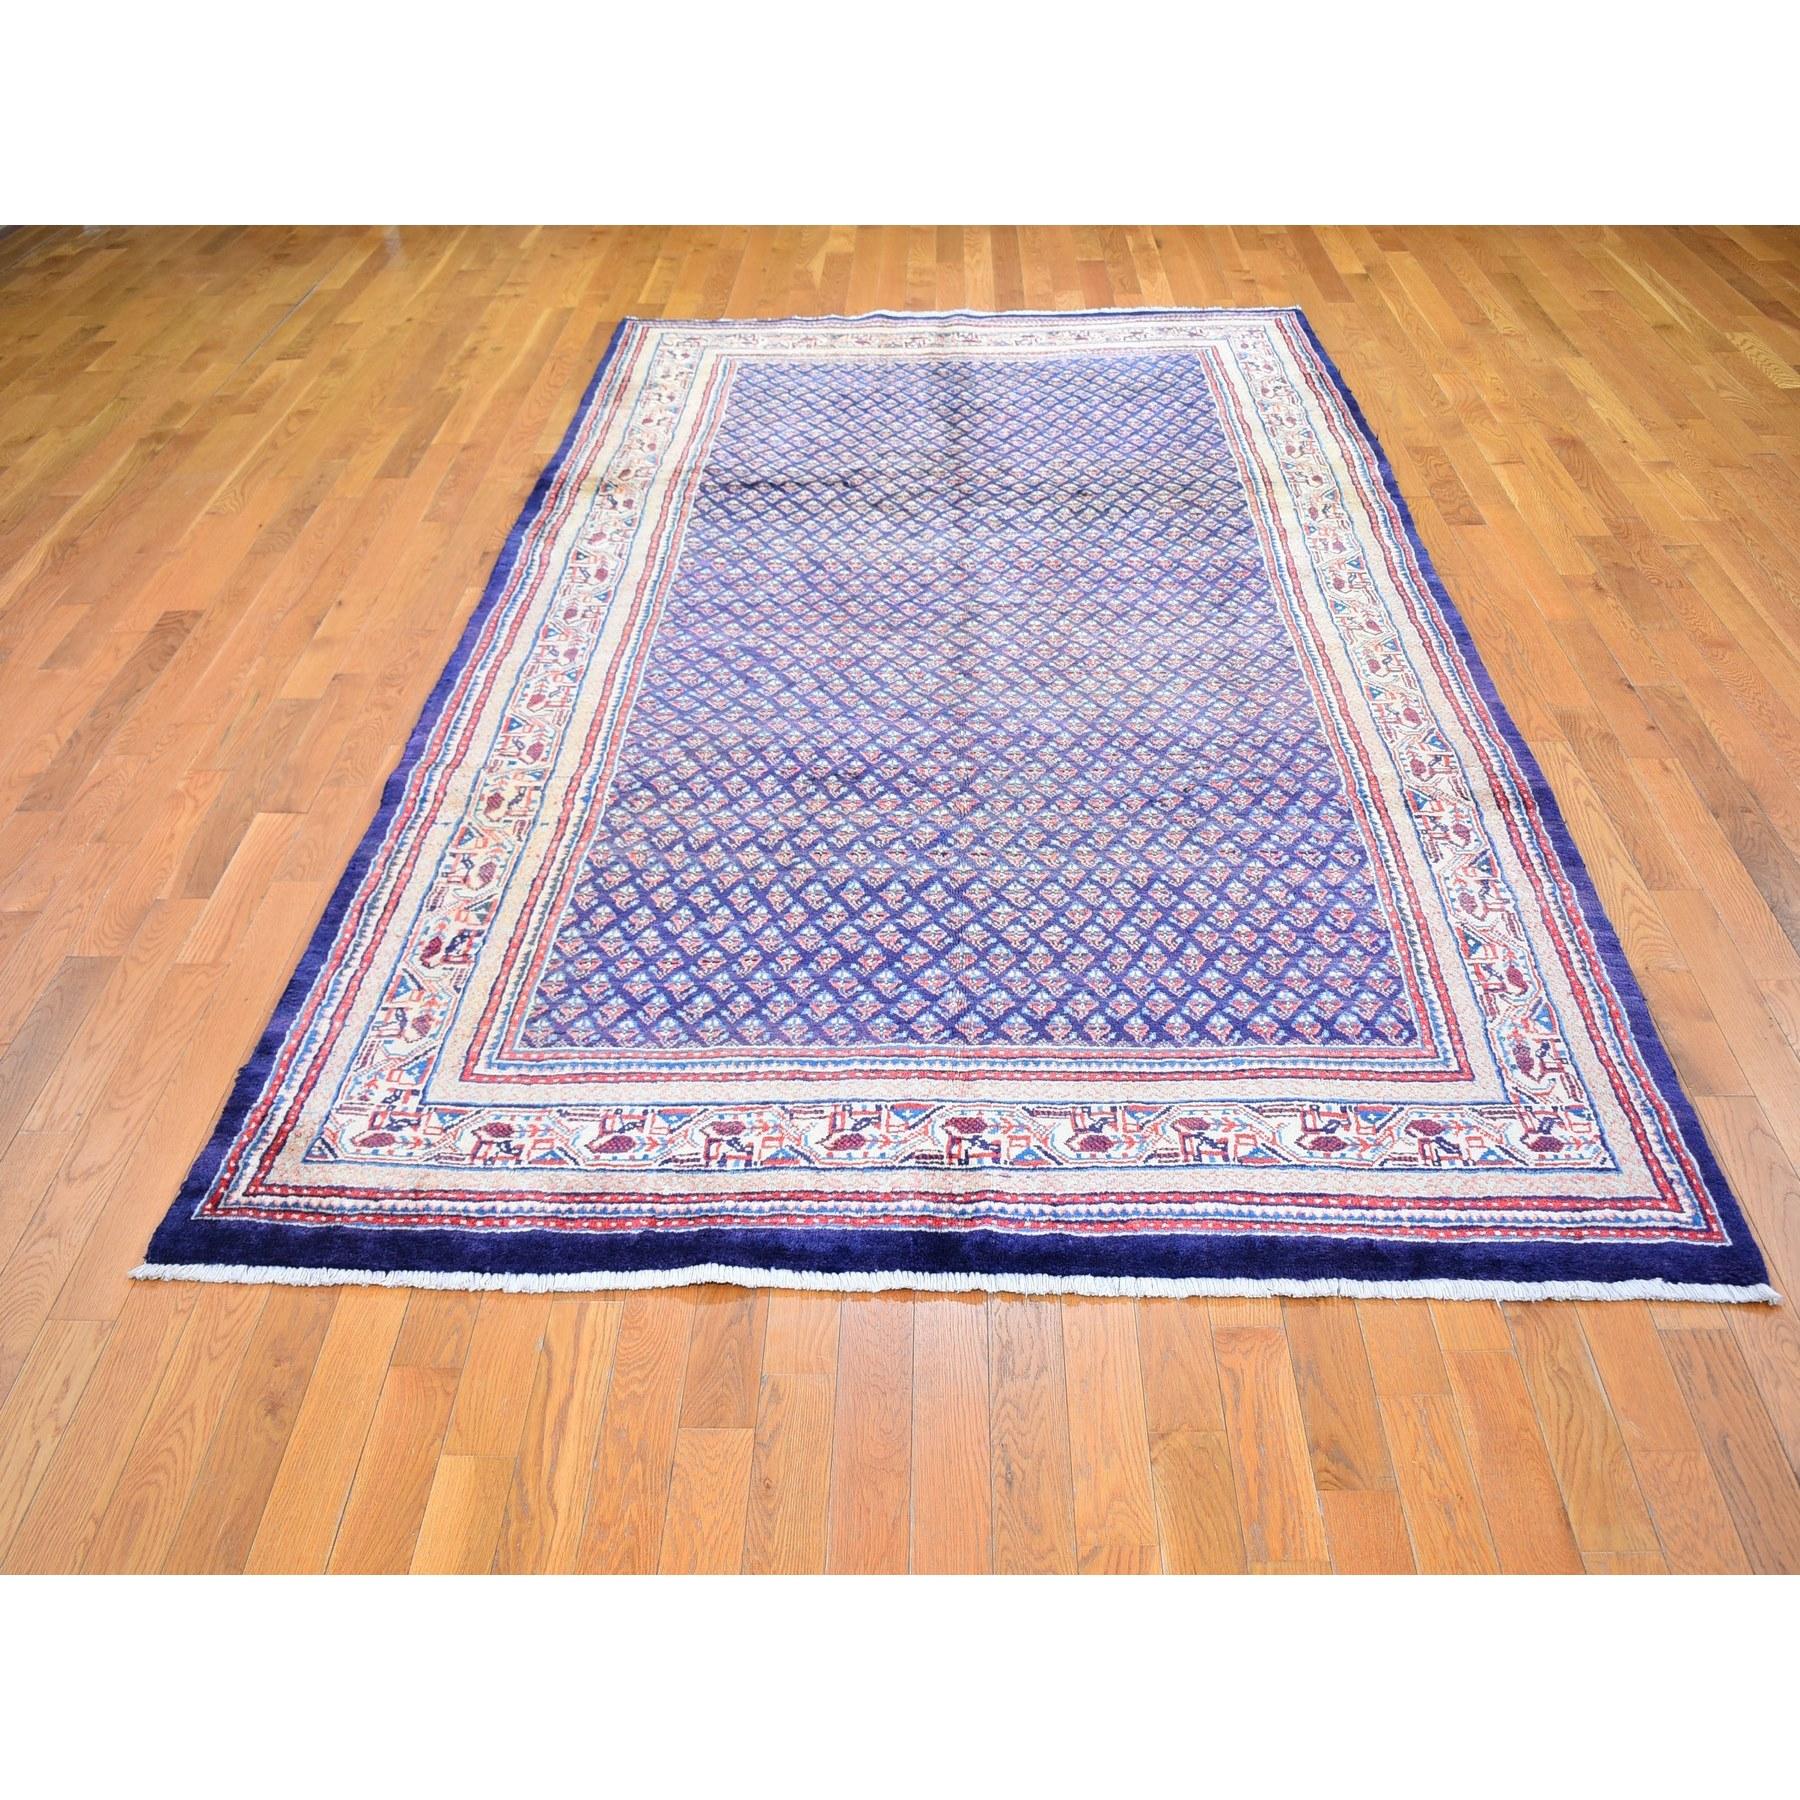 This fabulous hand knotted carpet has been created and designed for extra strength and durability. This rug has been handcrafted for weeks in the traditional method that is used to make Rugs. This is truly a one-of-kind piece. 

Exact rug size in